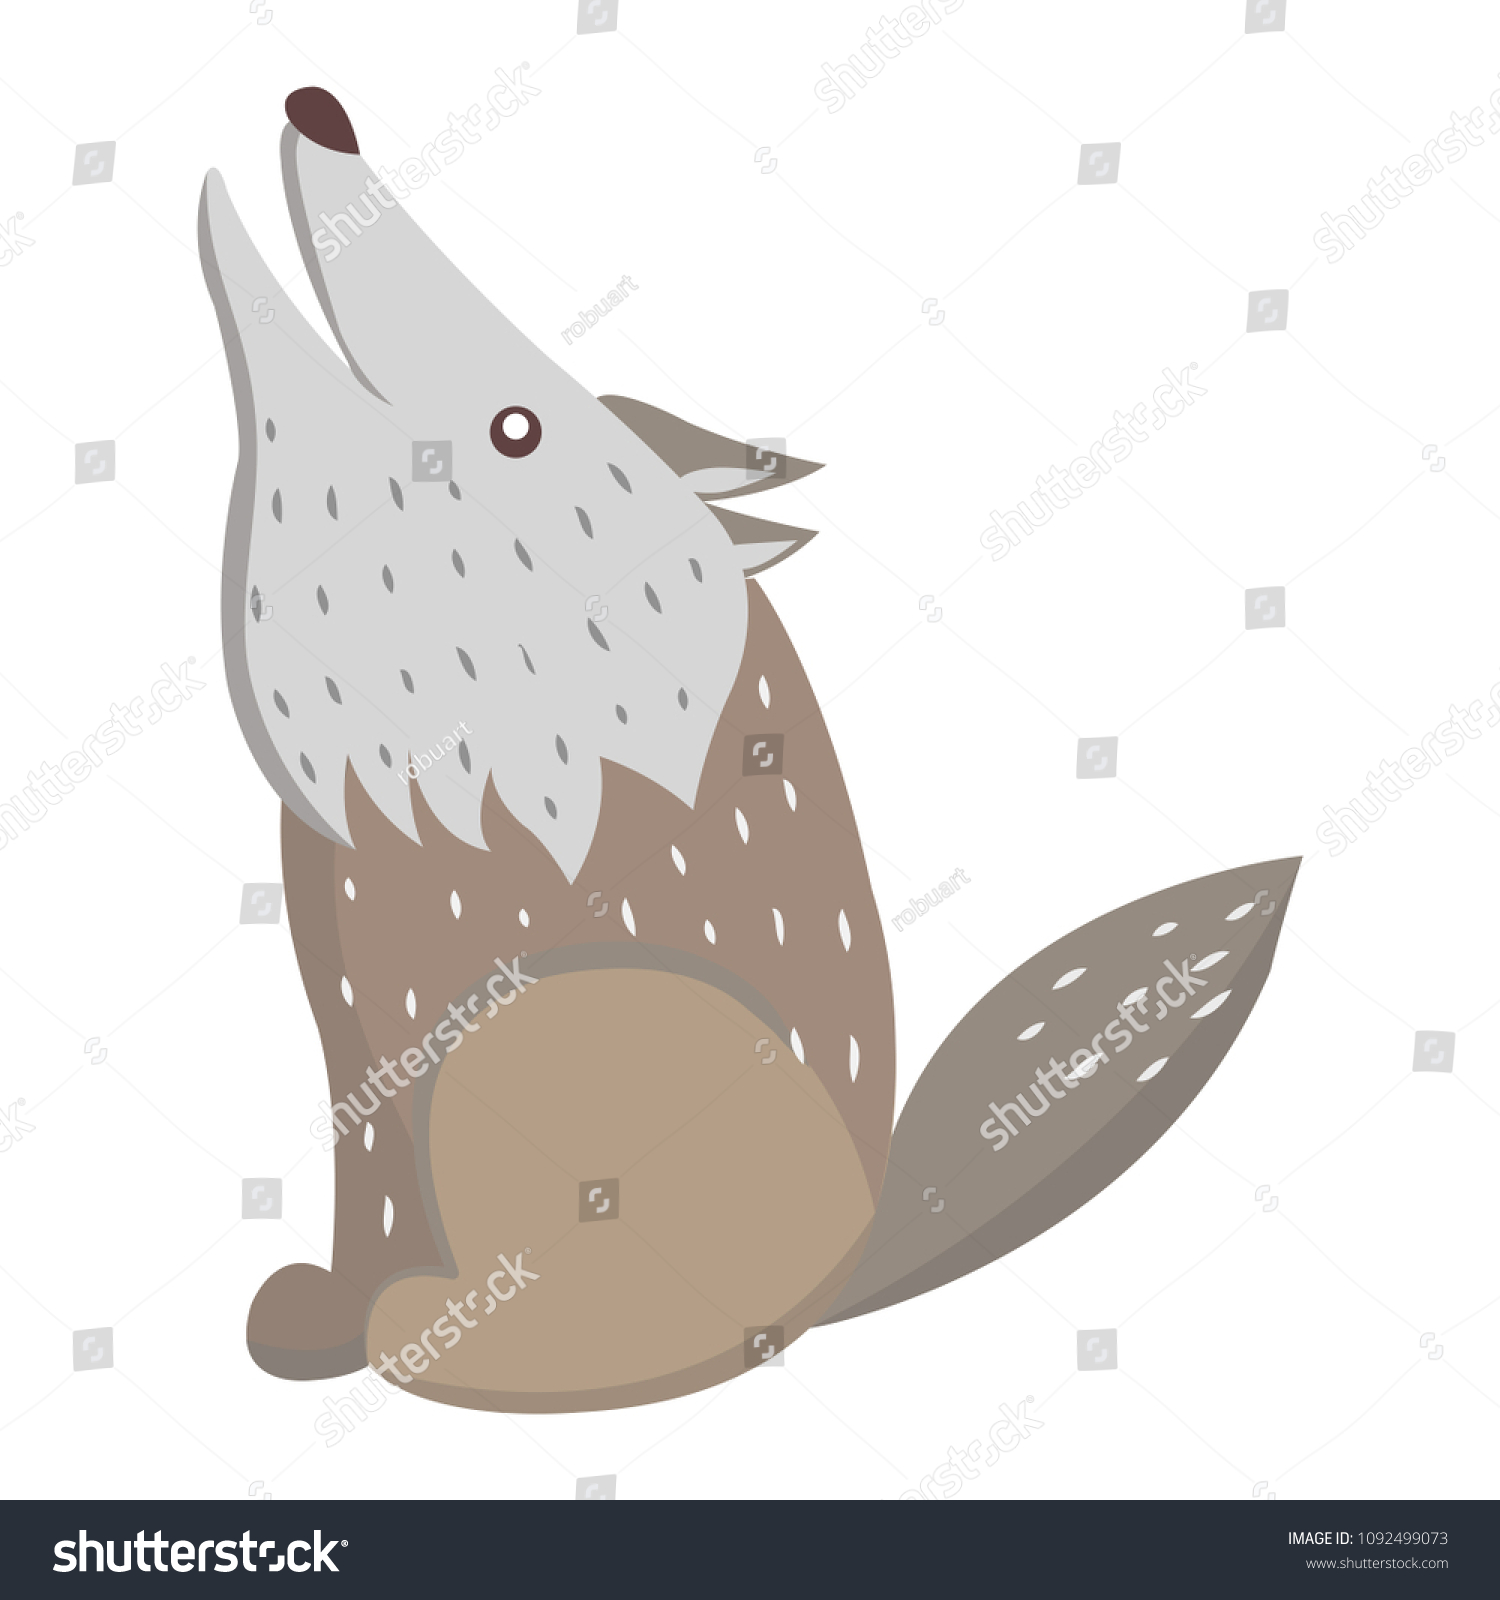 SVG of Cute funny grey howling wolf vector flat cartoon sticker isolated on white. Wild predatory animal illustration for game counters, price tags svg